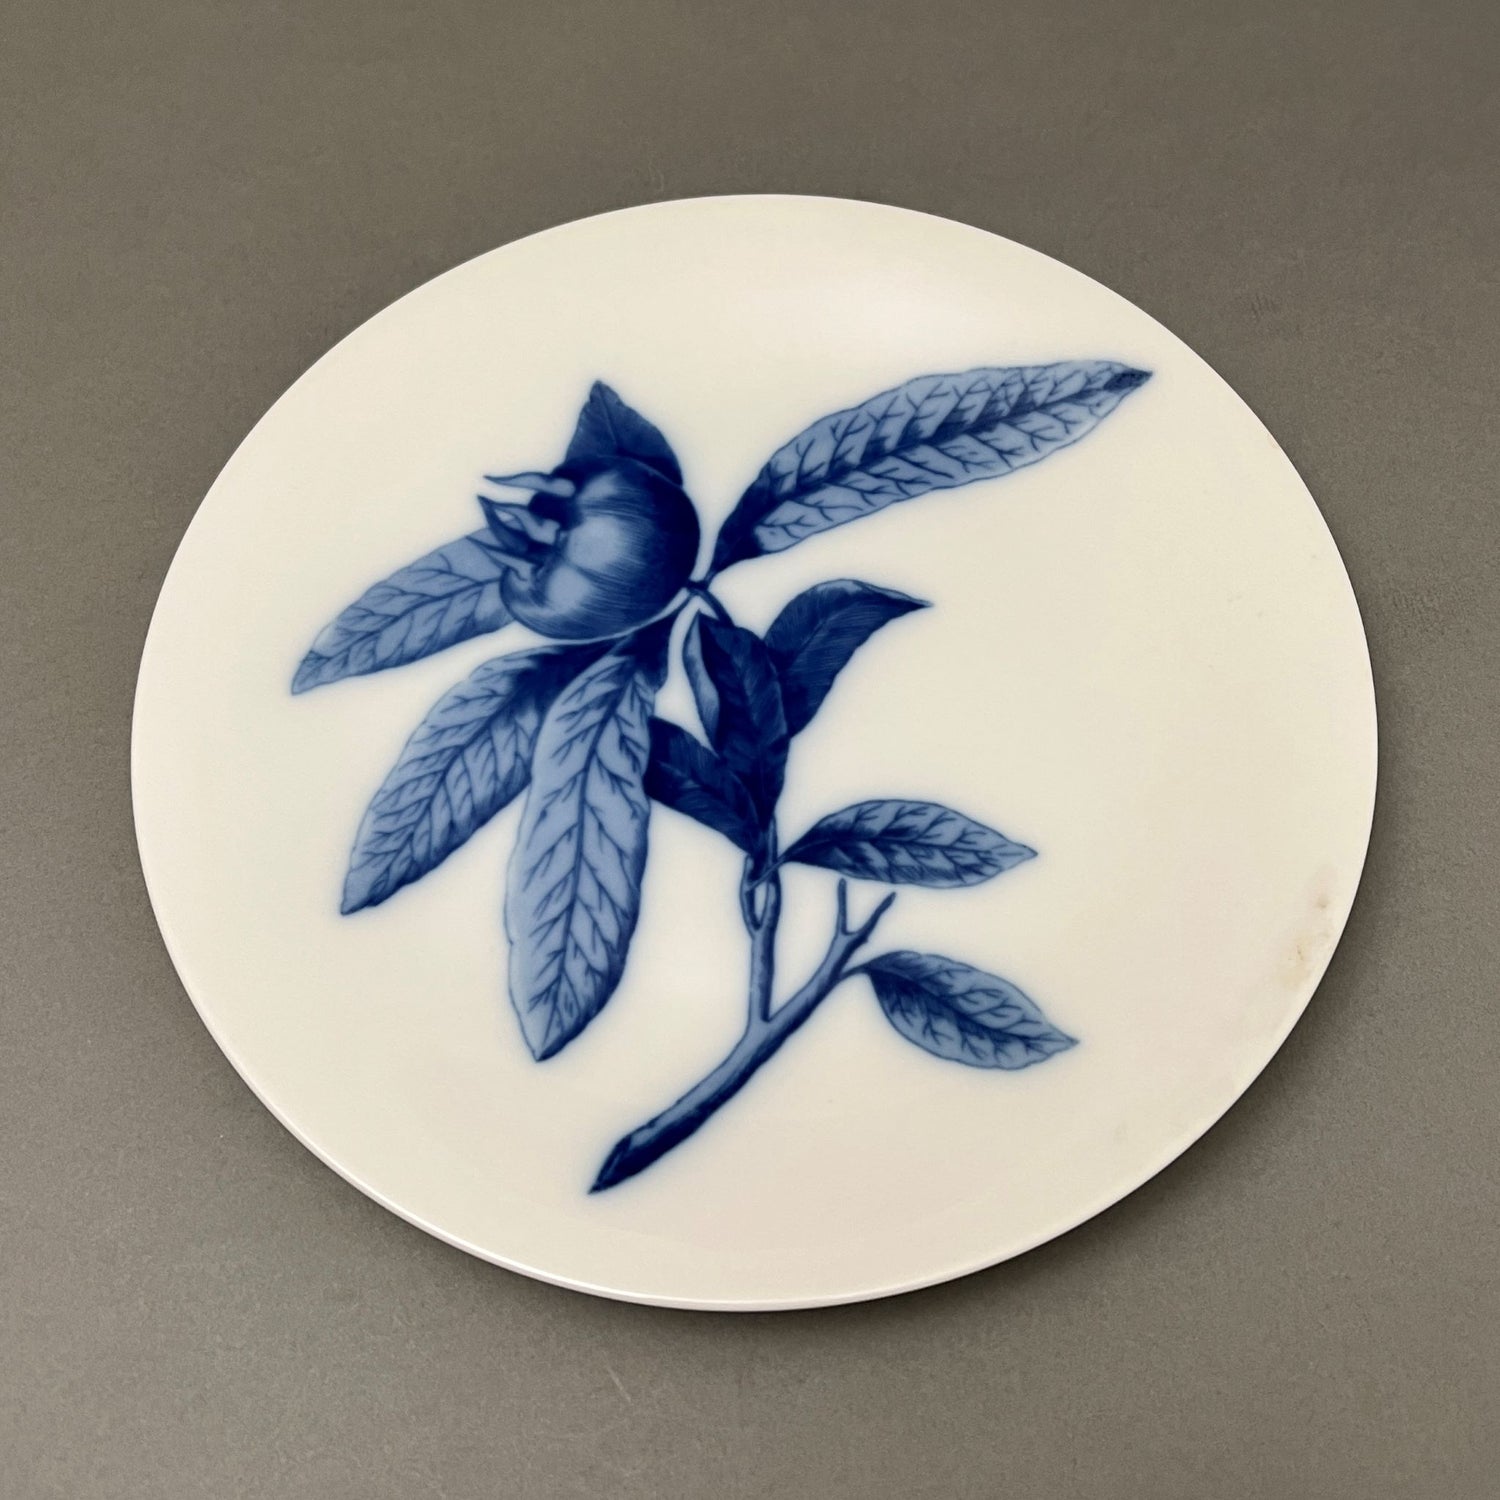 White plate with blue fruit design sitting on gray background